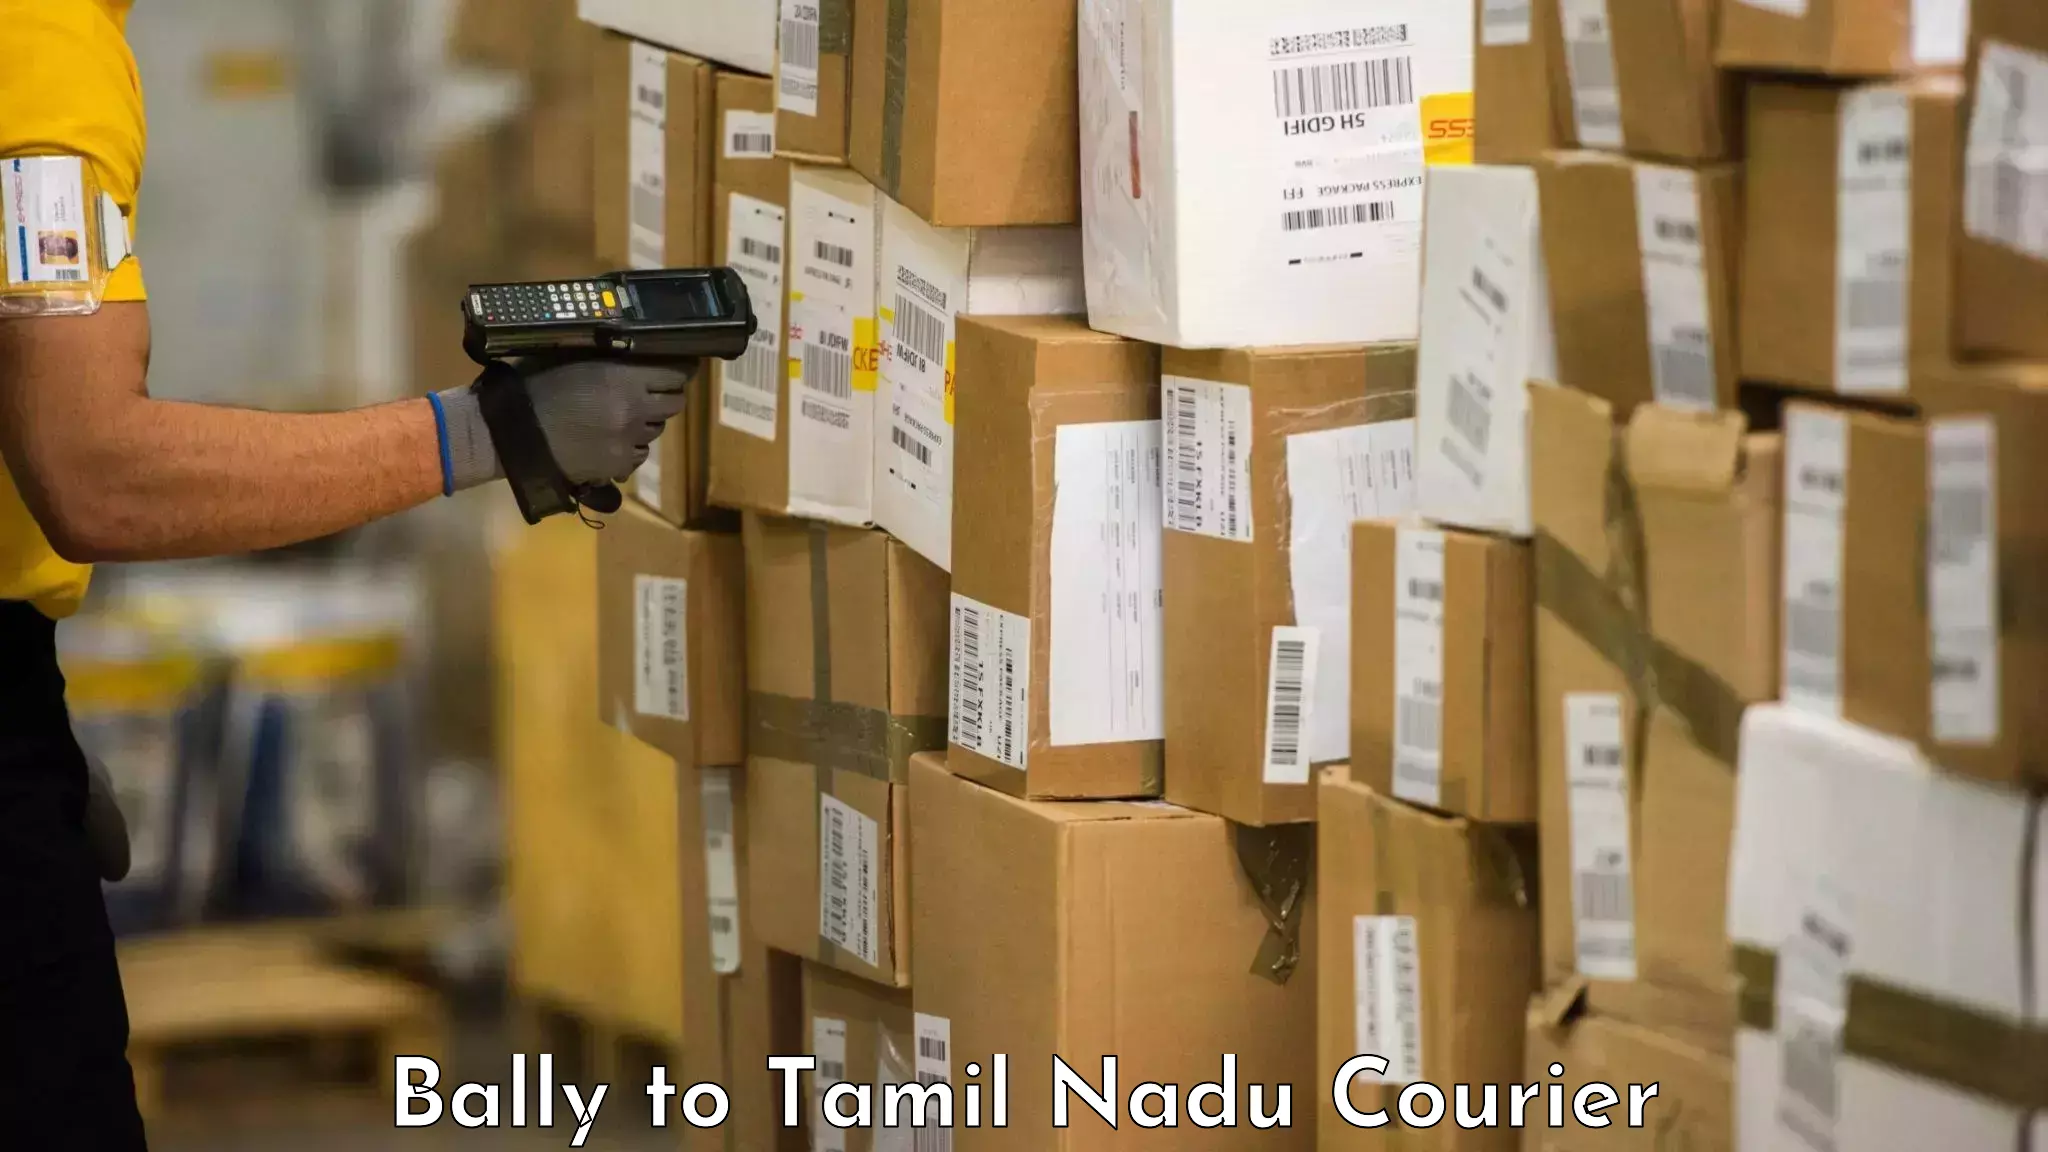 Luggage shipping specialists Bally to Tamil Nadu